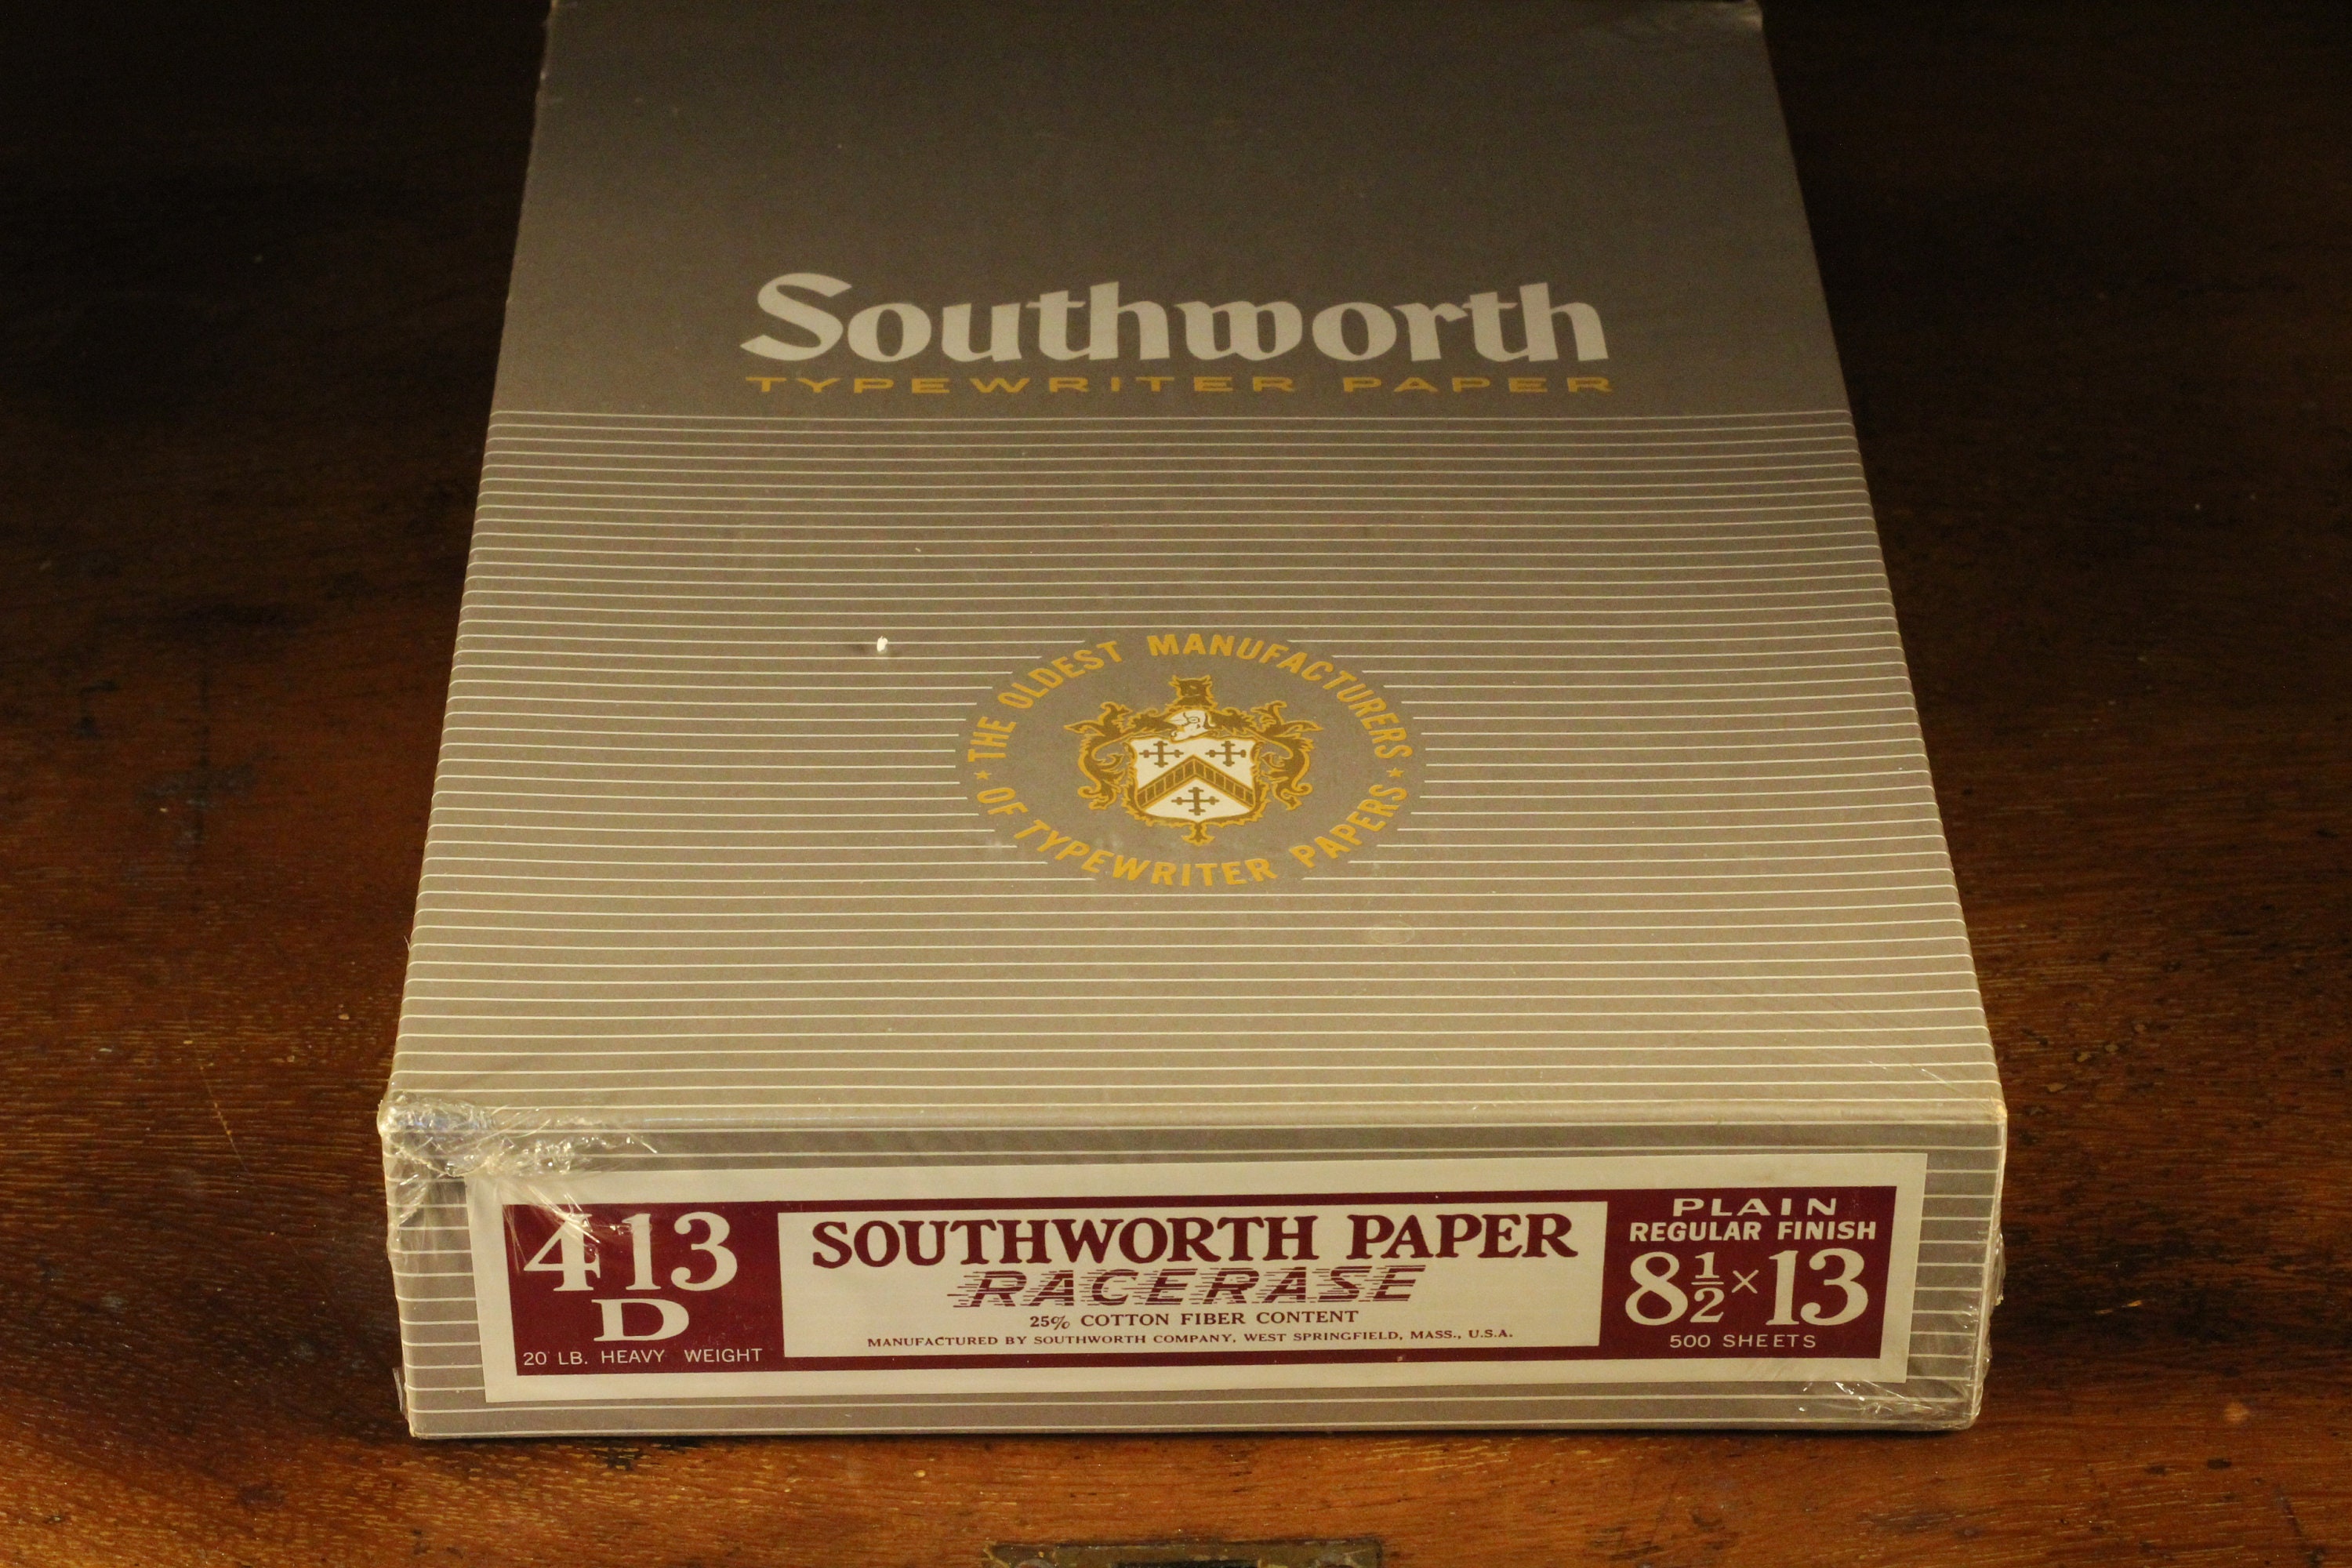 Southworth Granite 8.5x11 Specialty/Resume Paper IVORY COLOR - 25  SHEETS/ORDER